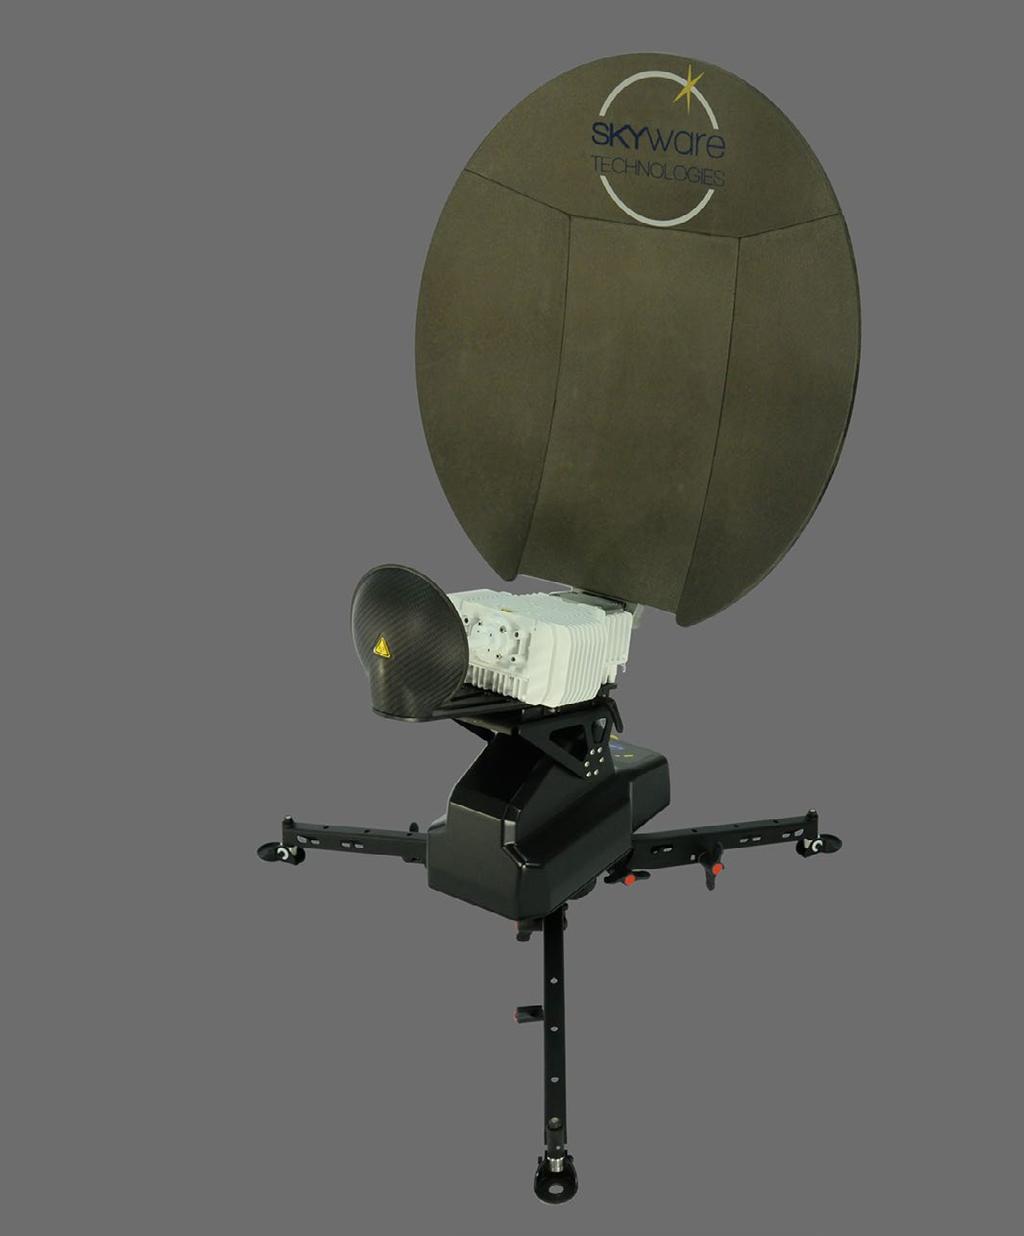 terminals, including the transportable ATOM 65 GX Auto-Acquire, a light-weight and rugged antenna system which can be